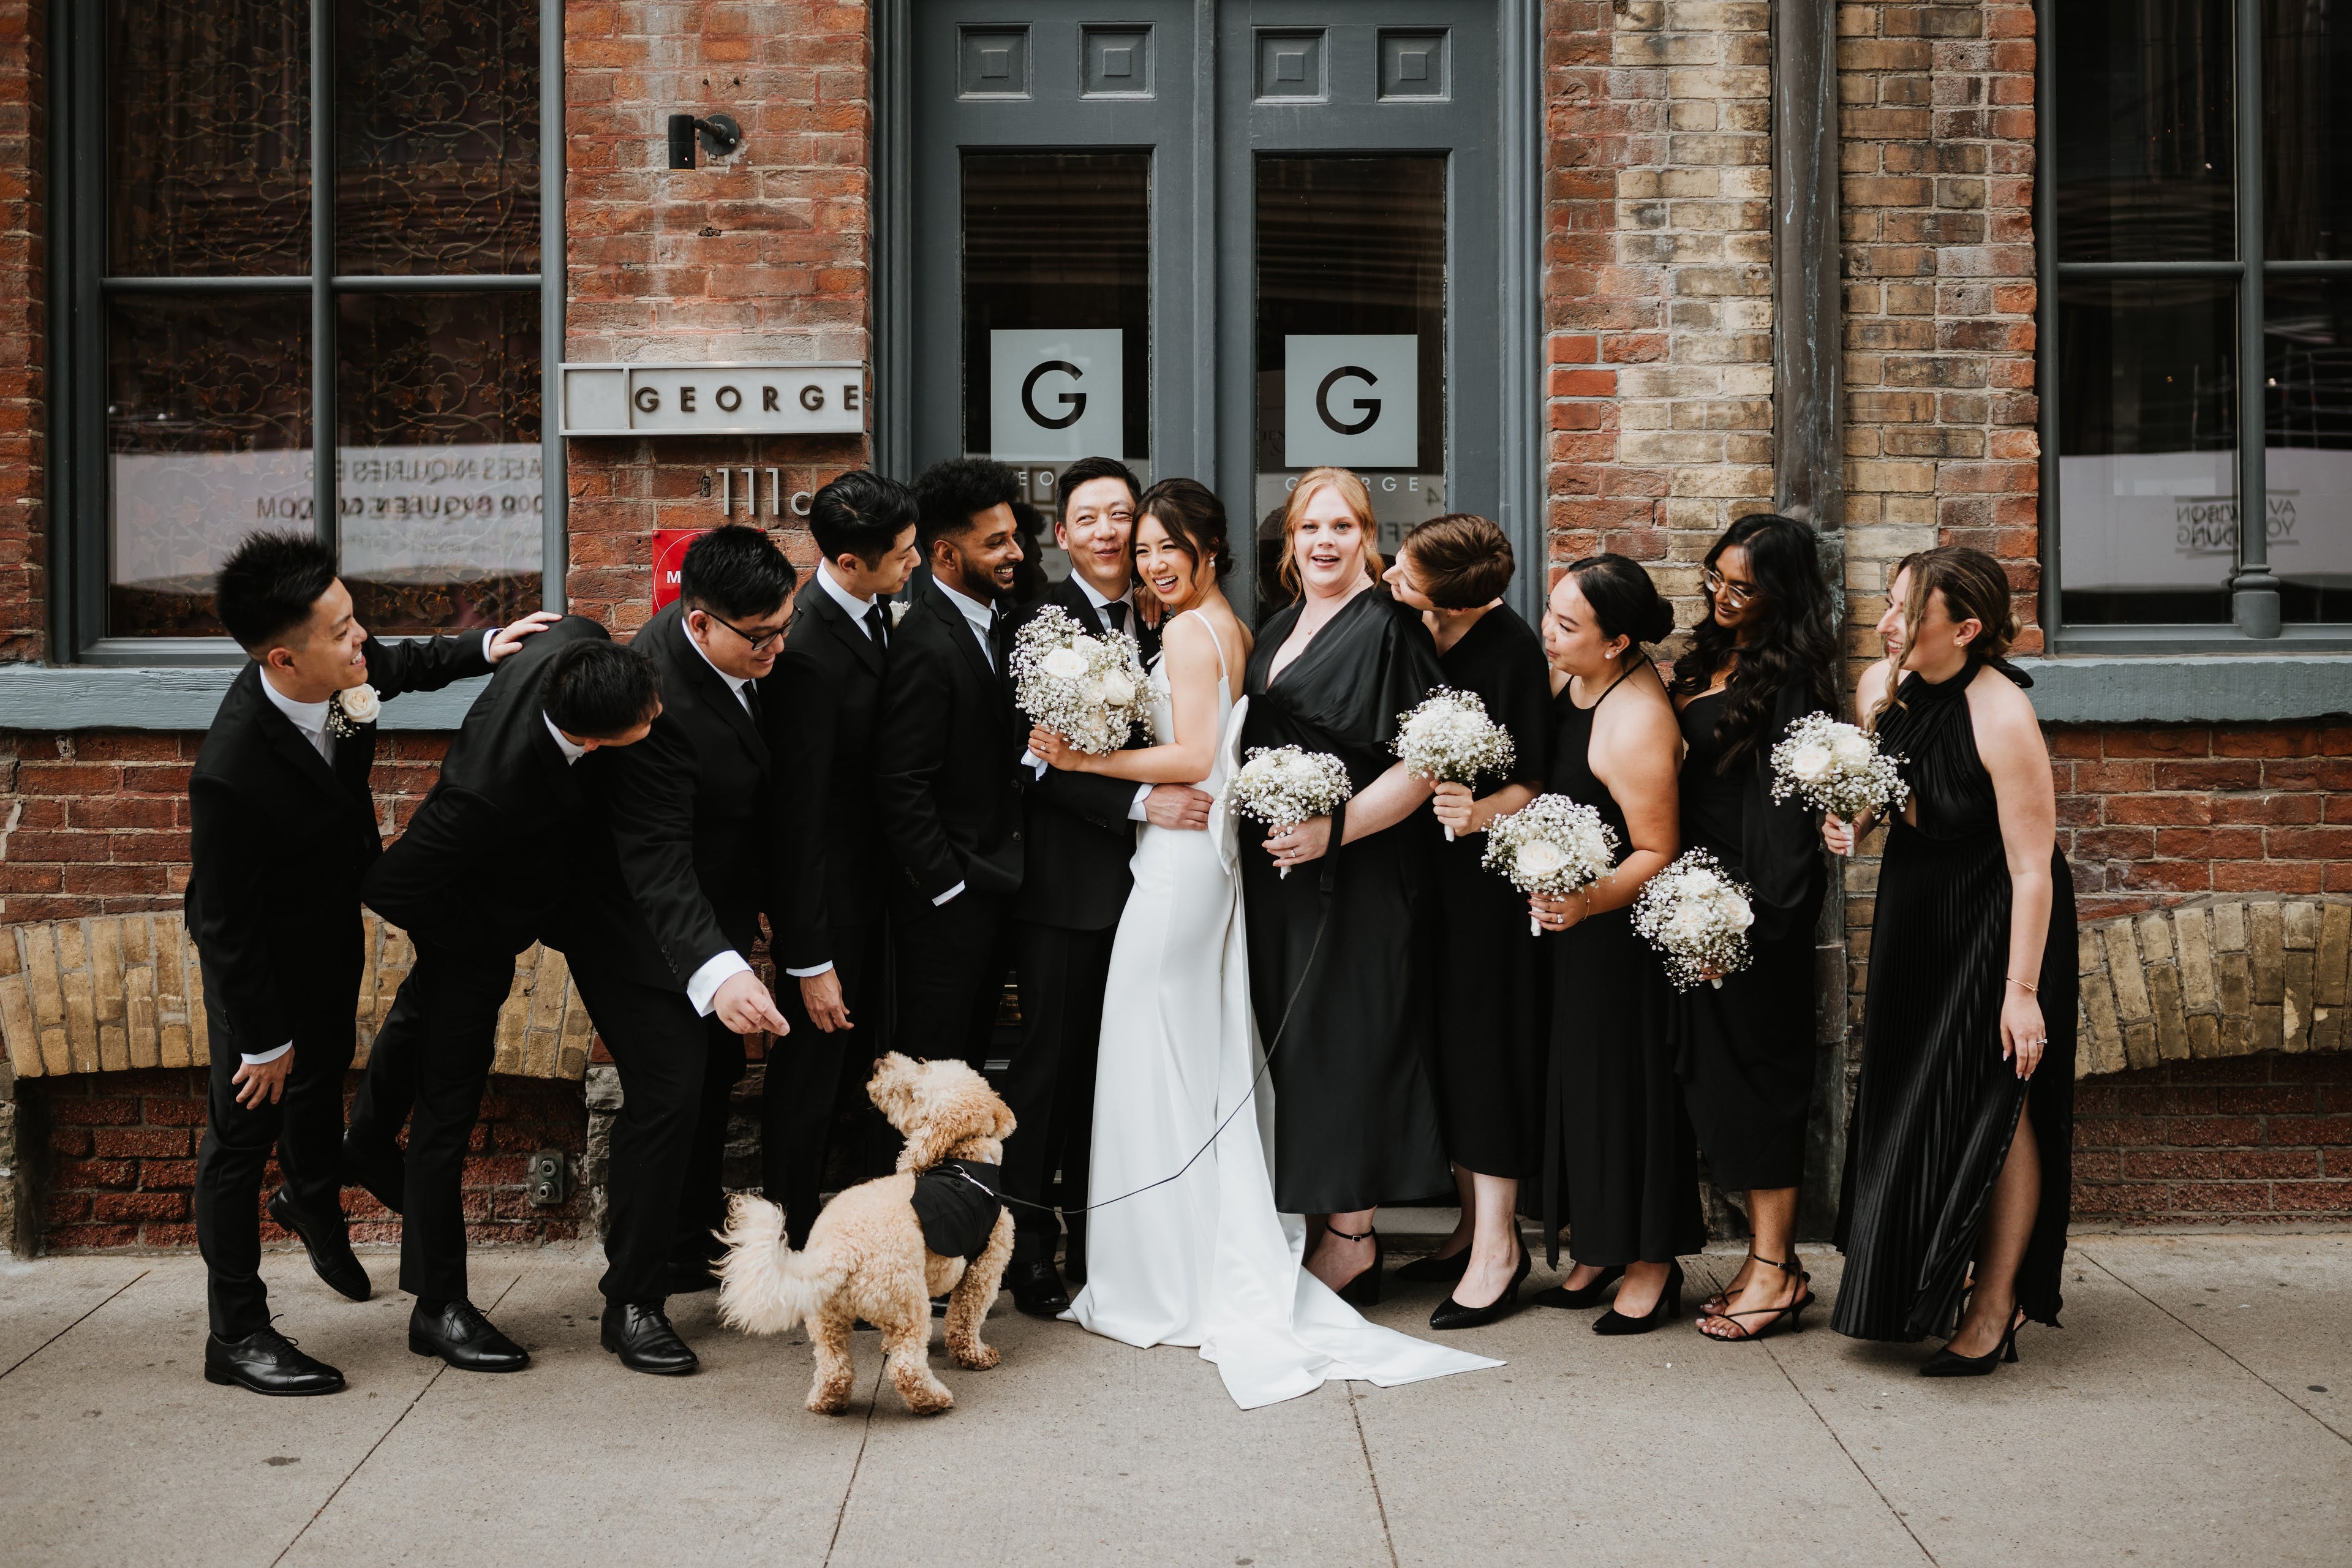 All Gowns | Bone and Grey Bridal